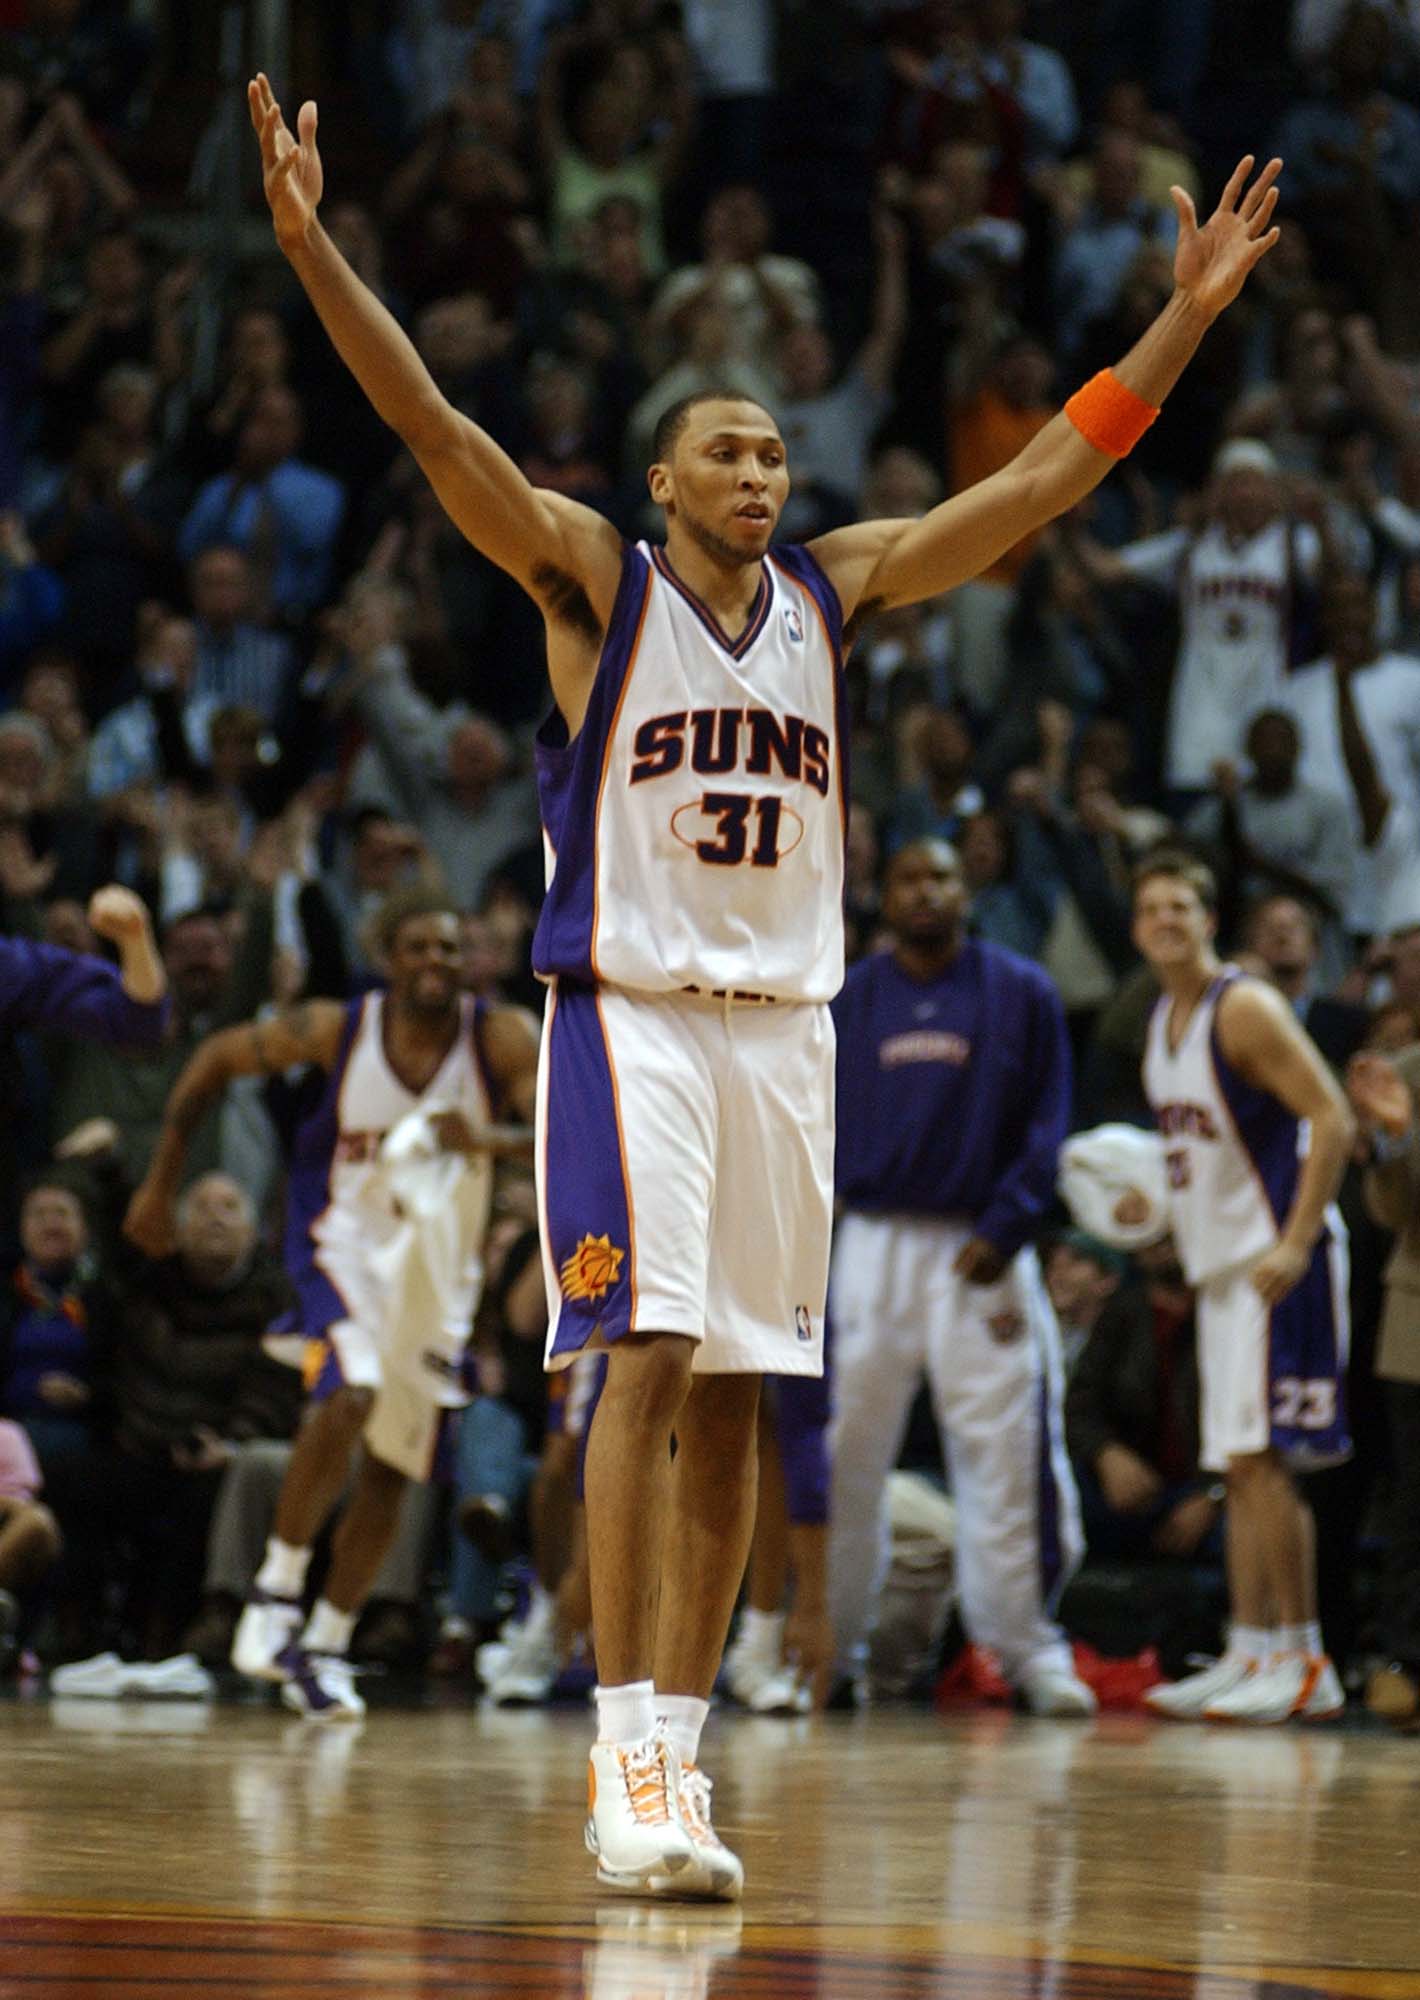 shawn marion suns jersey